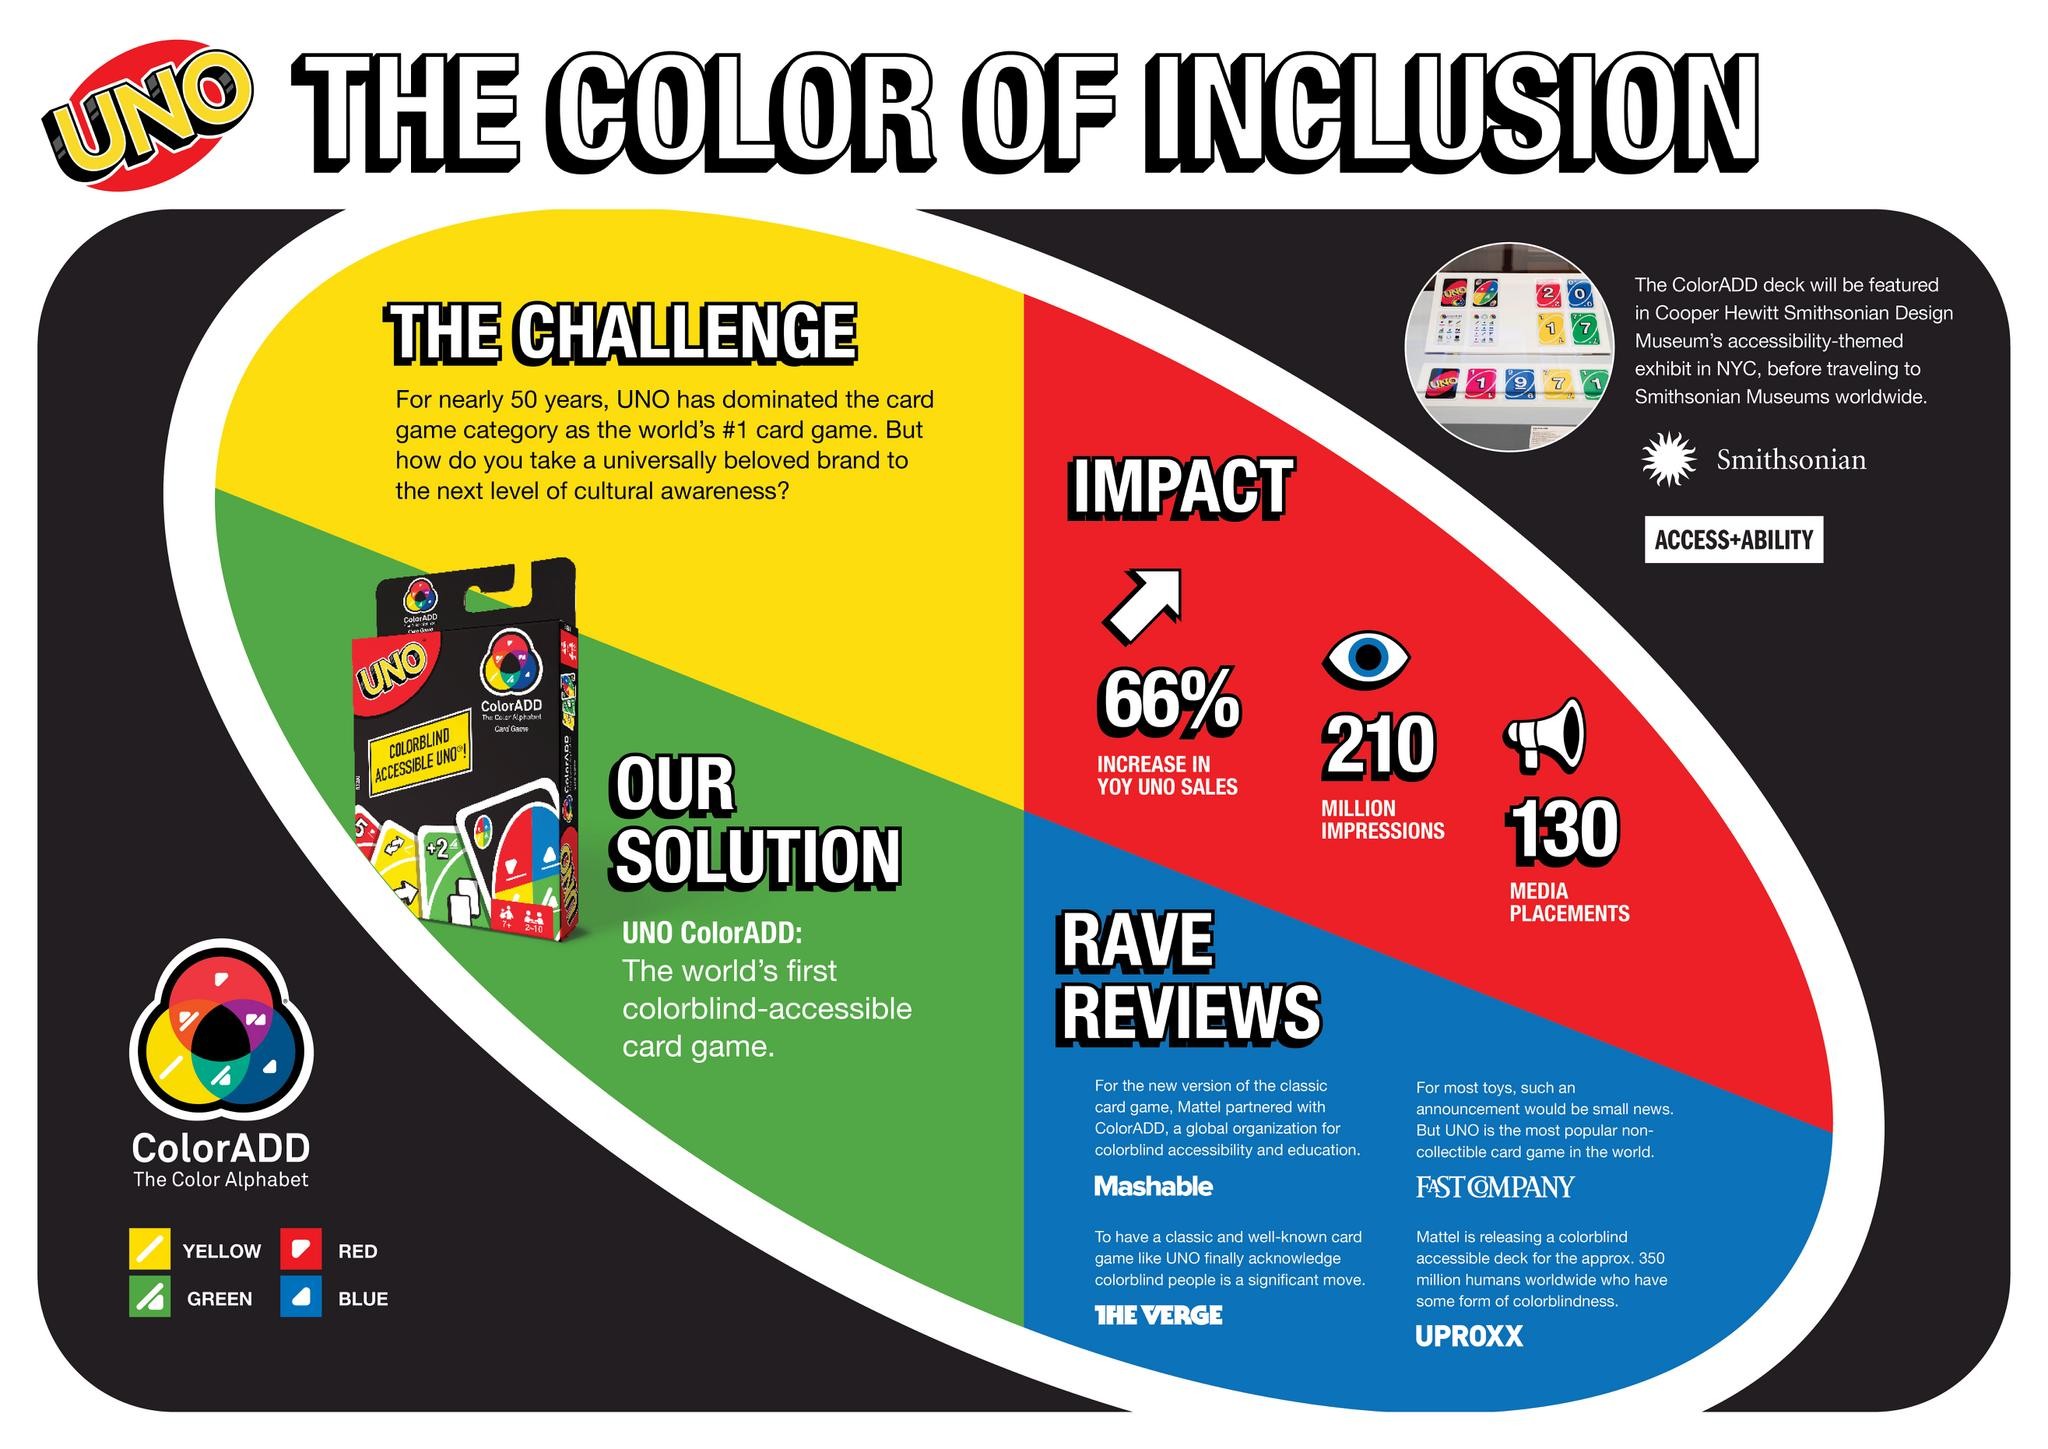 The Color of Inclusion